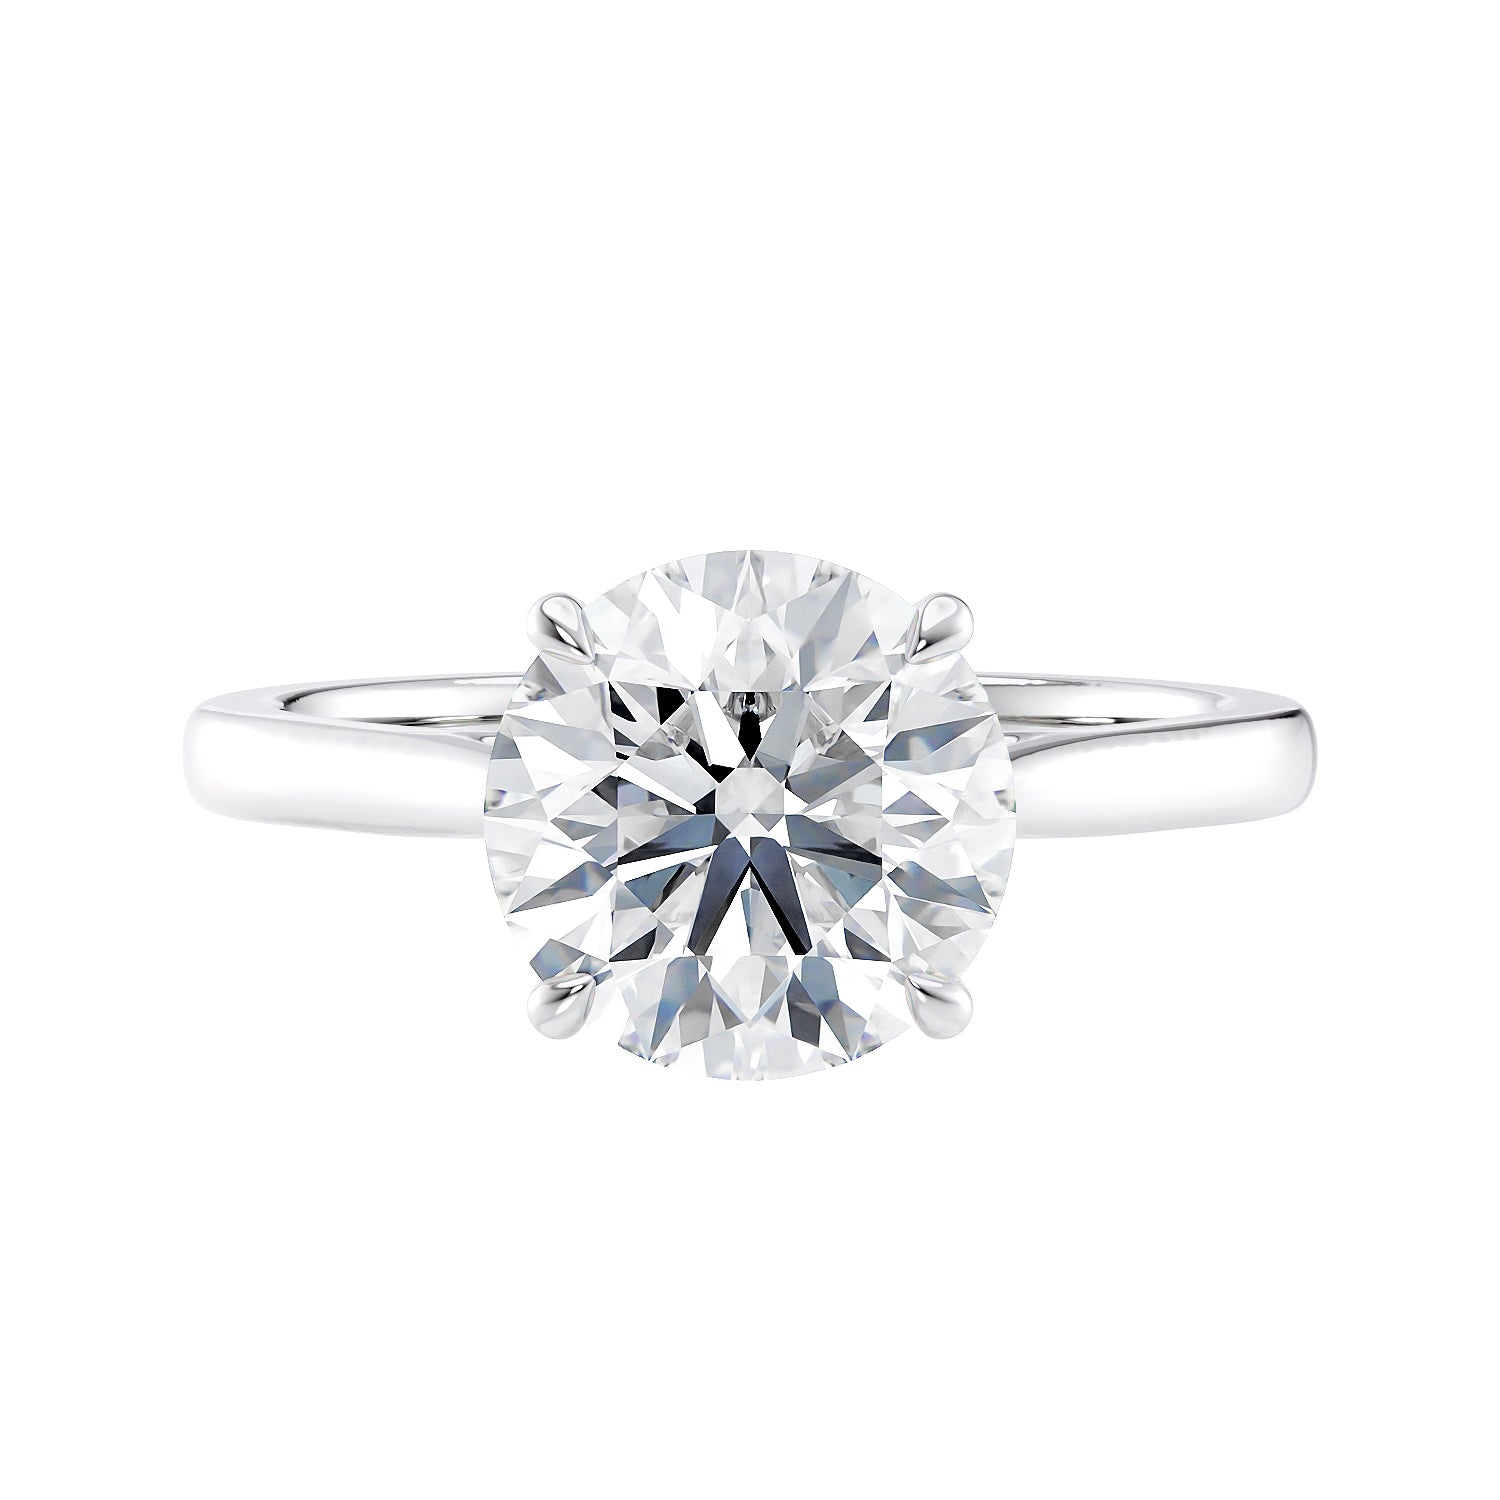 Classic diamond engagement ring white gold front view.